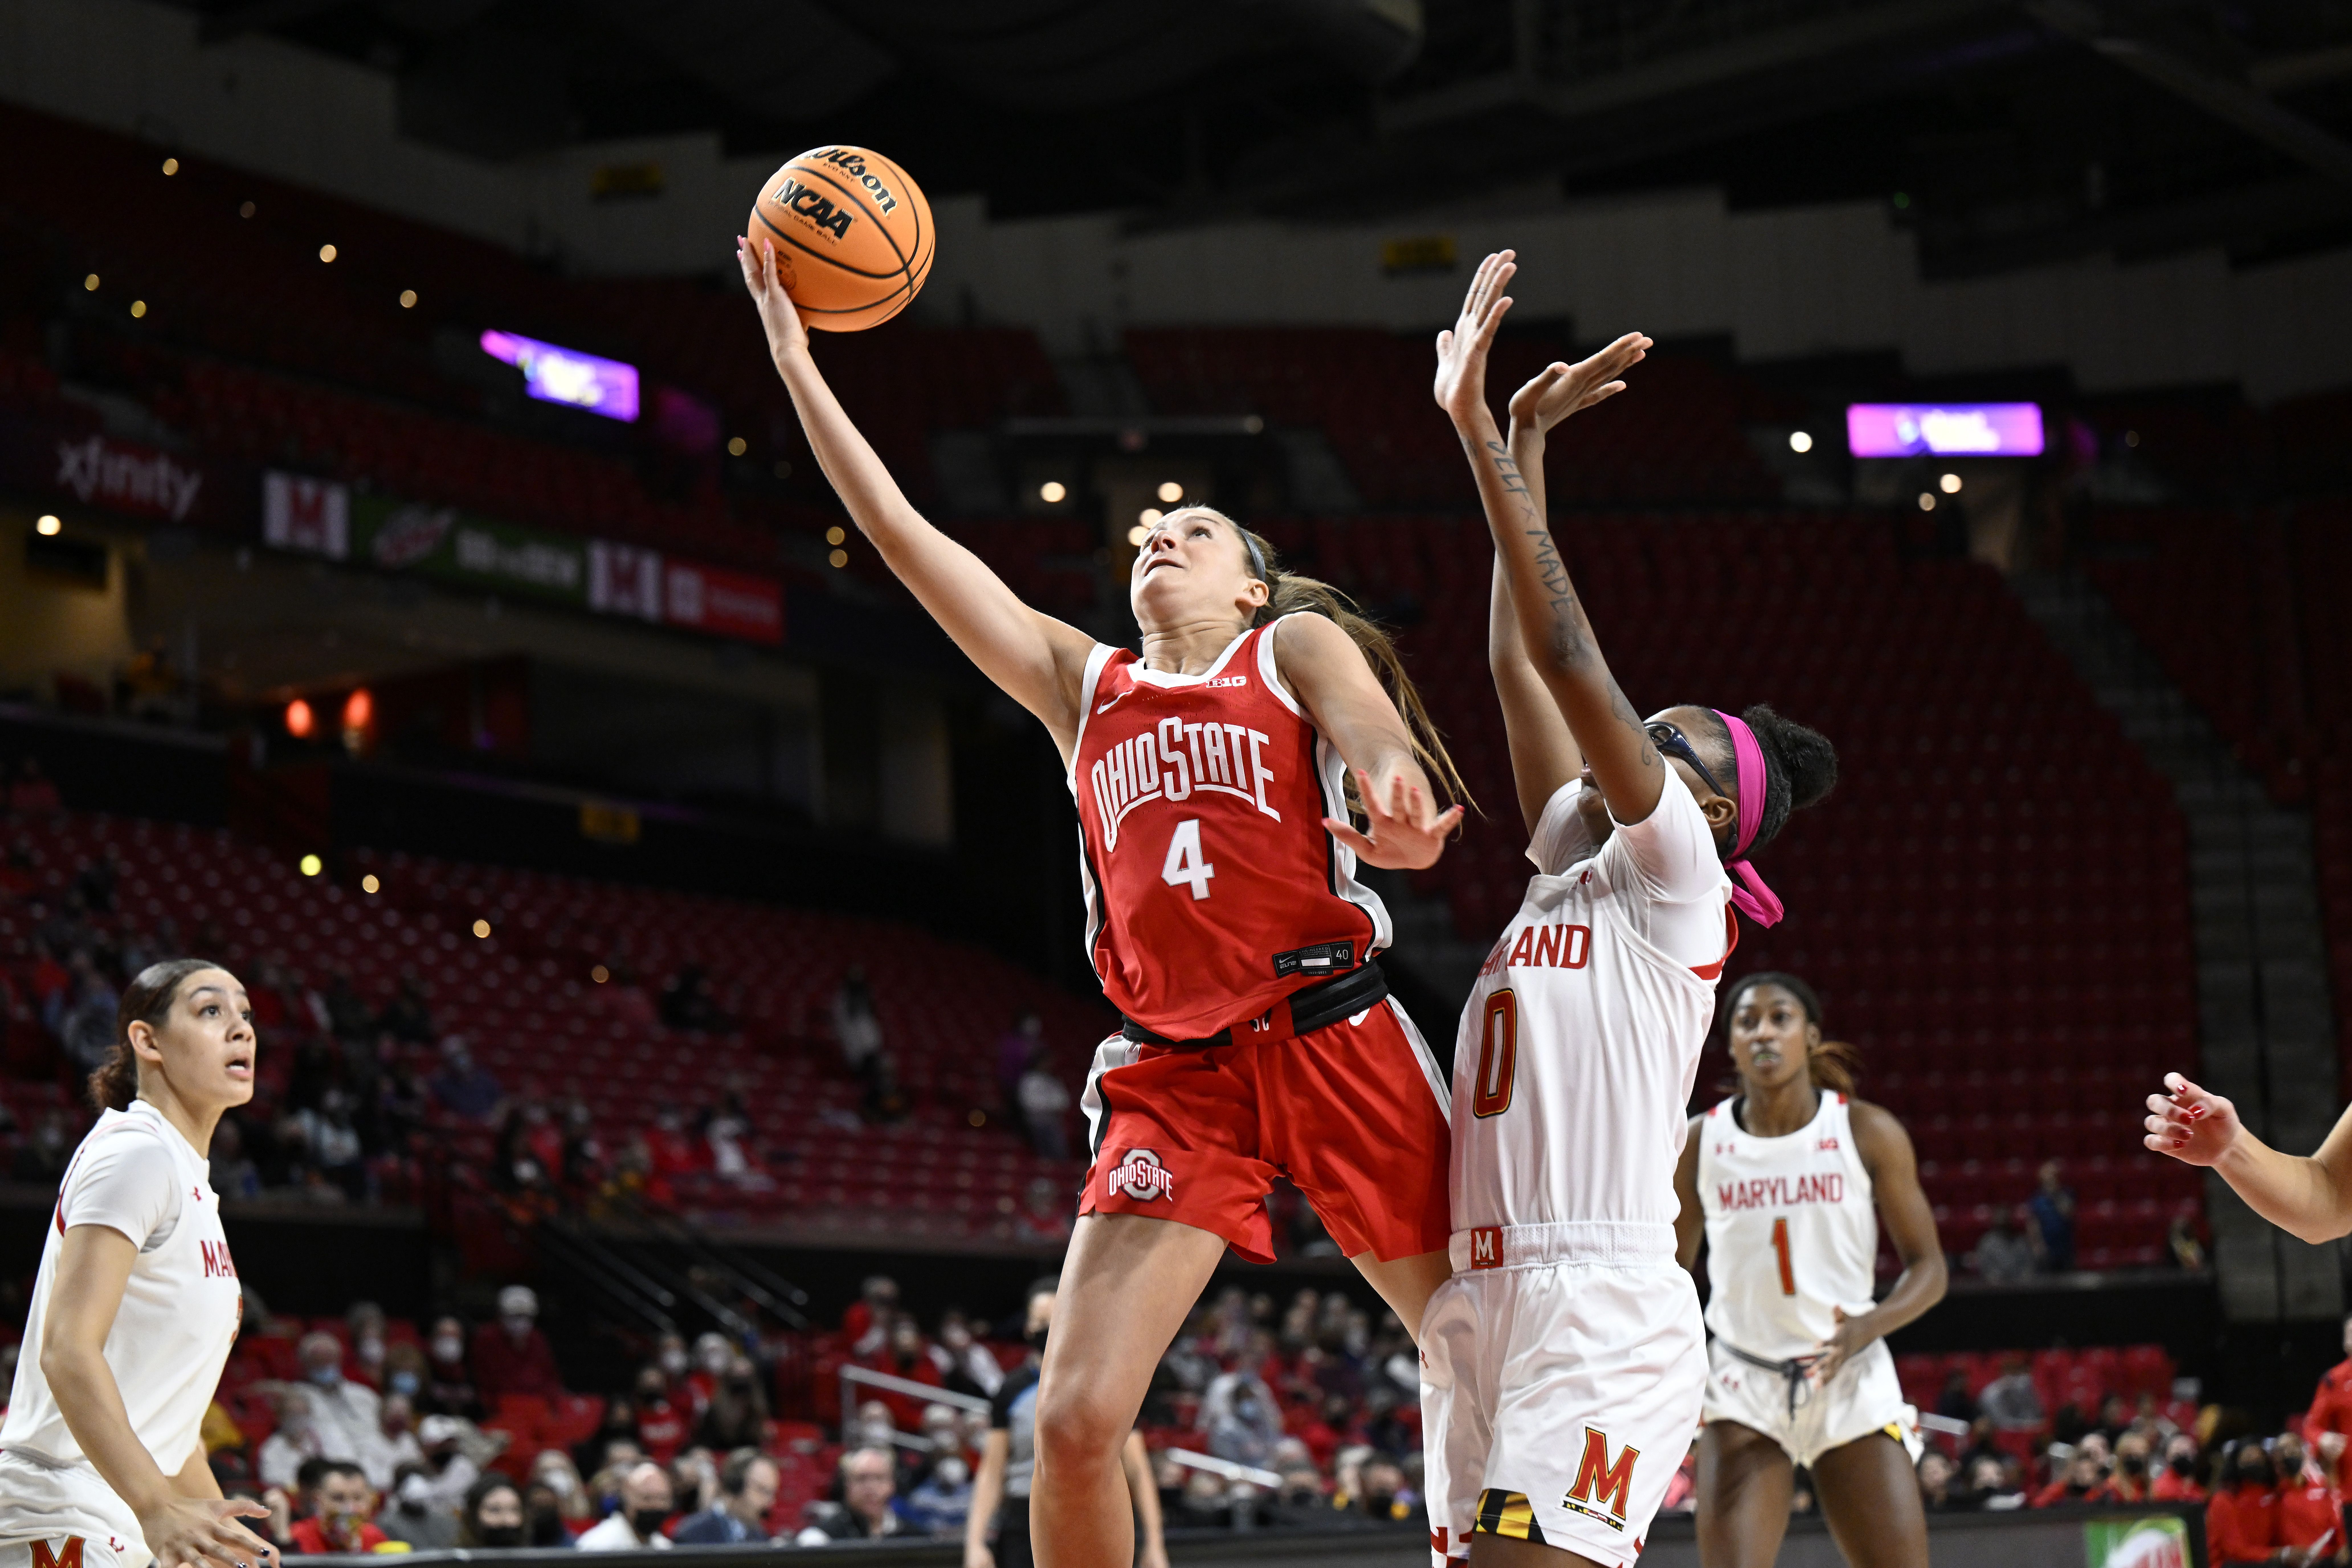 Ohio State player Jacy Sheldon rises for a lay-up against a Maryland defender.